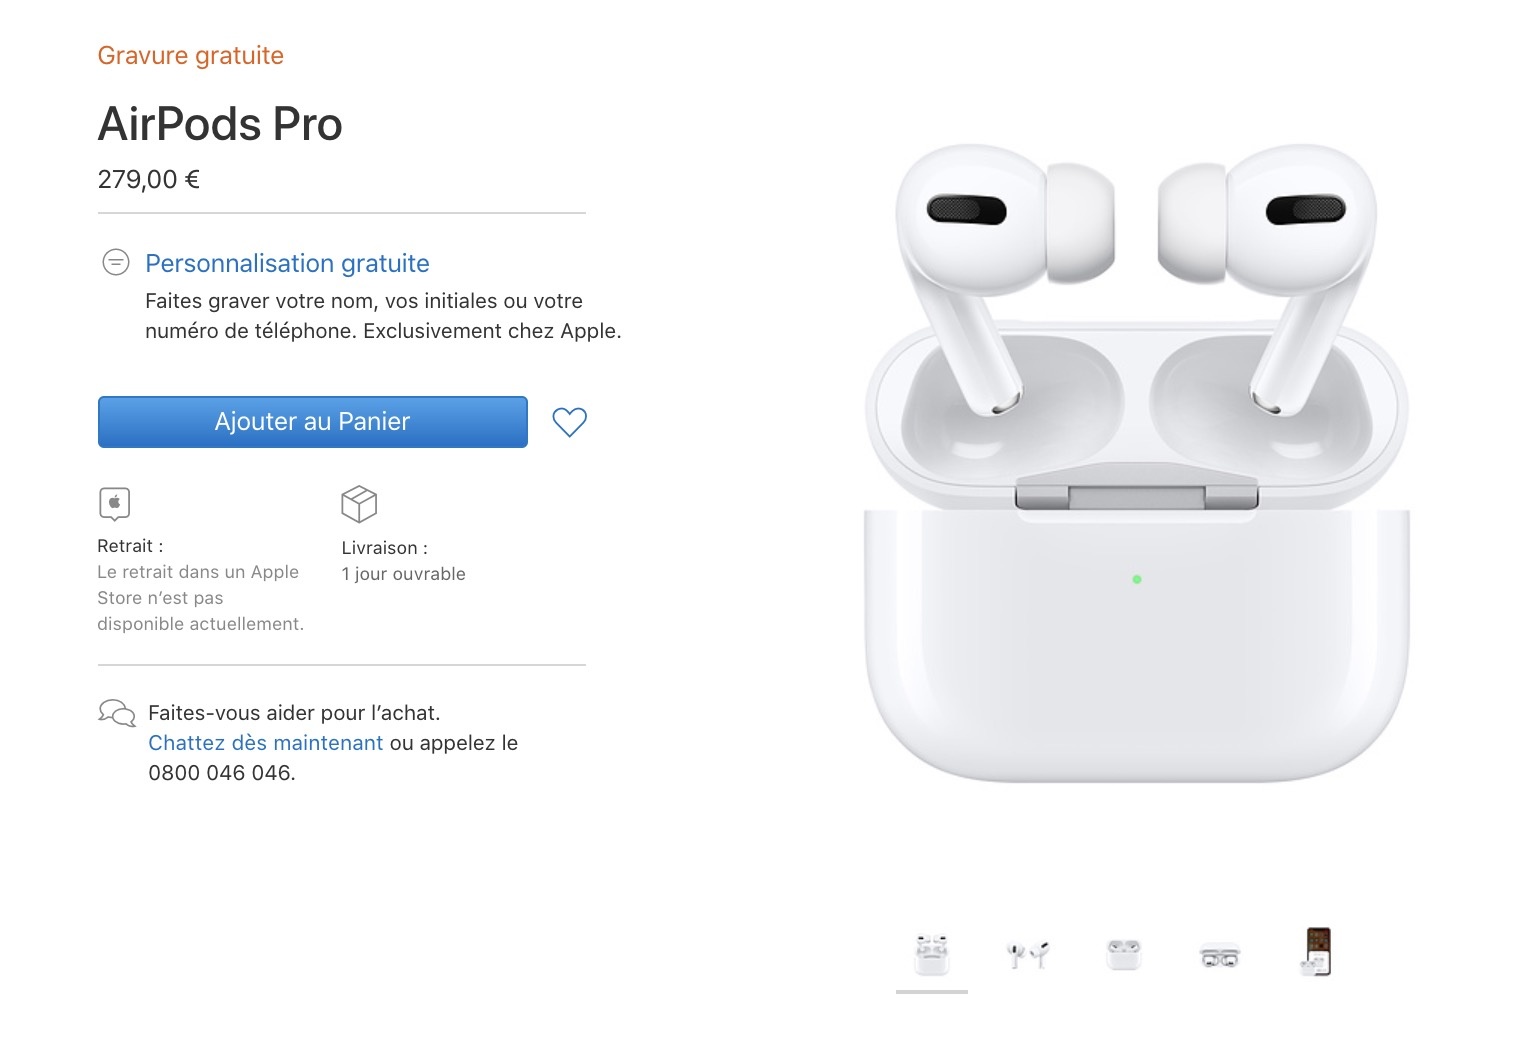 Сброс airpods 2. AIRPODS Pro 4 Mini. AIRPODS Pro gx7hl1g81059. Apple AIRPODS Pro with Wireless Charging Case (mwp22ru/a). Вес размера AIRPODS Pro 4 беспроводных.